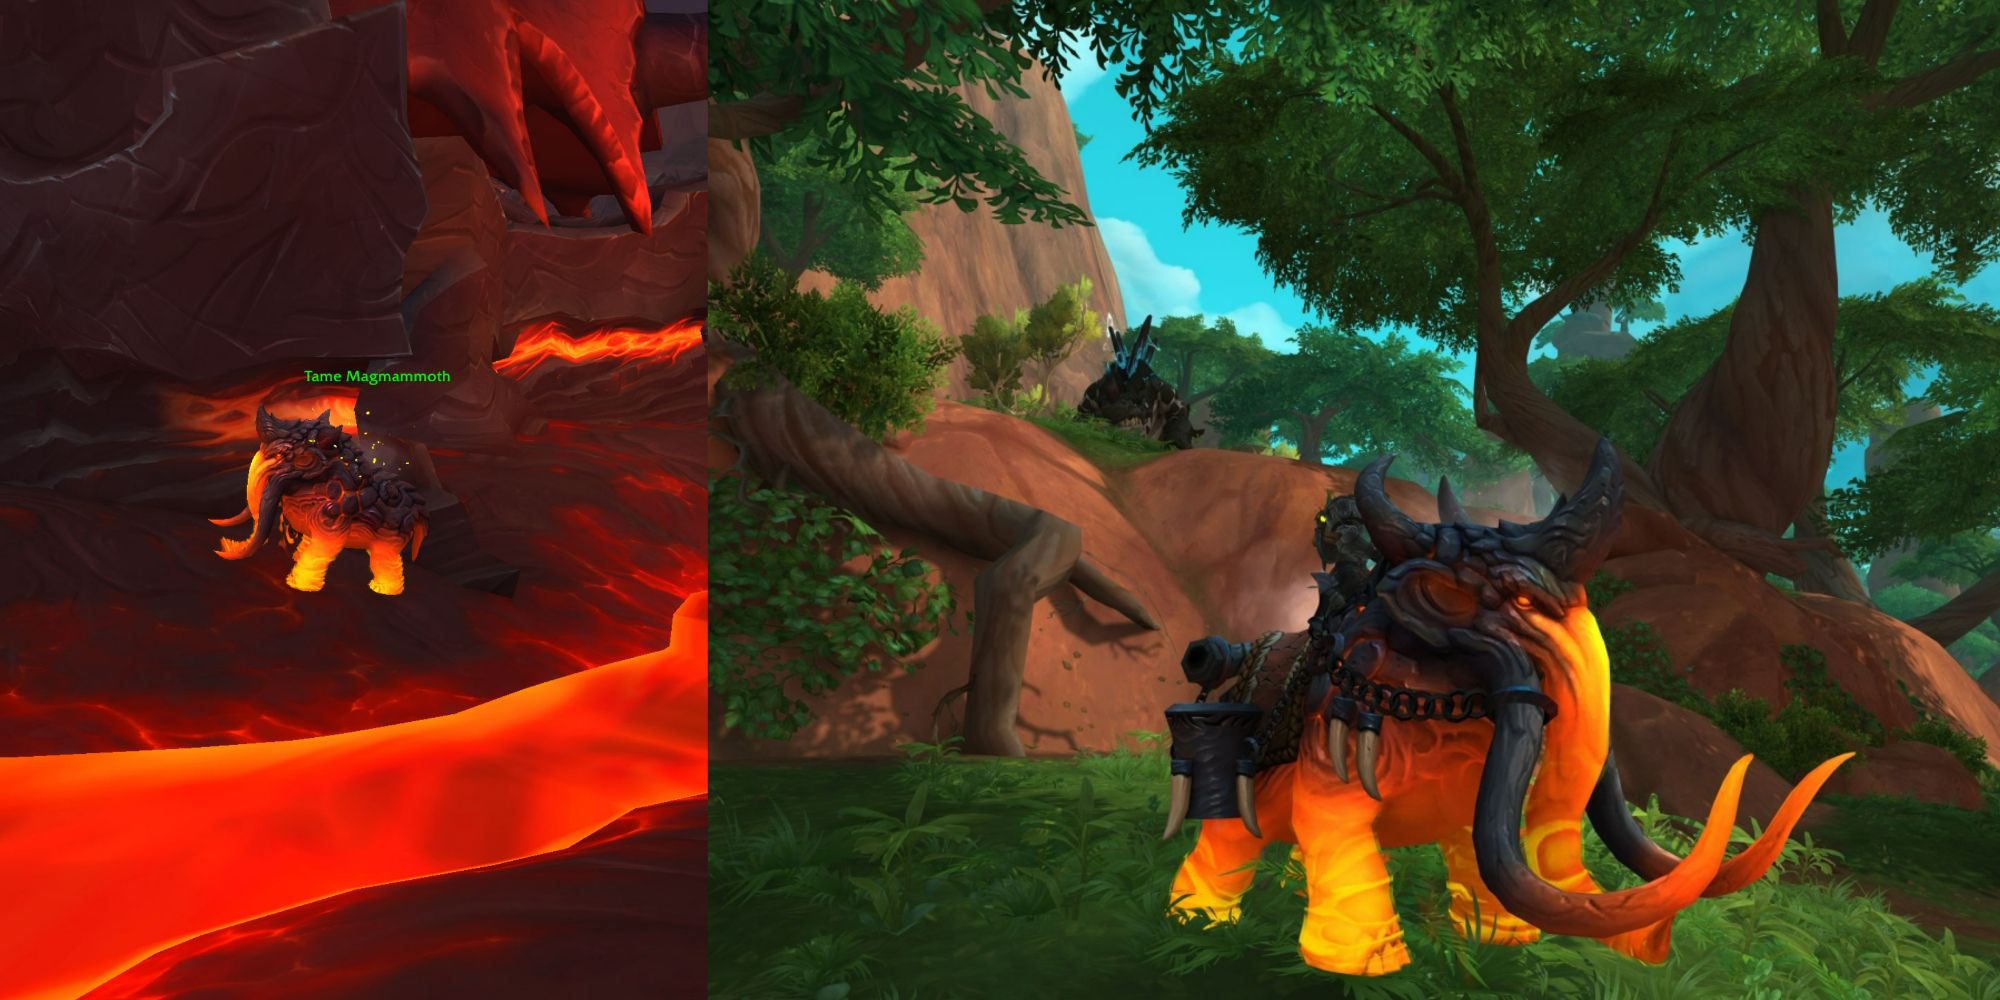 WoW split image of Tame magmammoth into loyal magmammoth mount